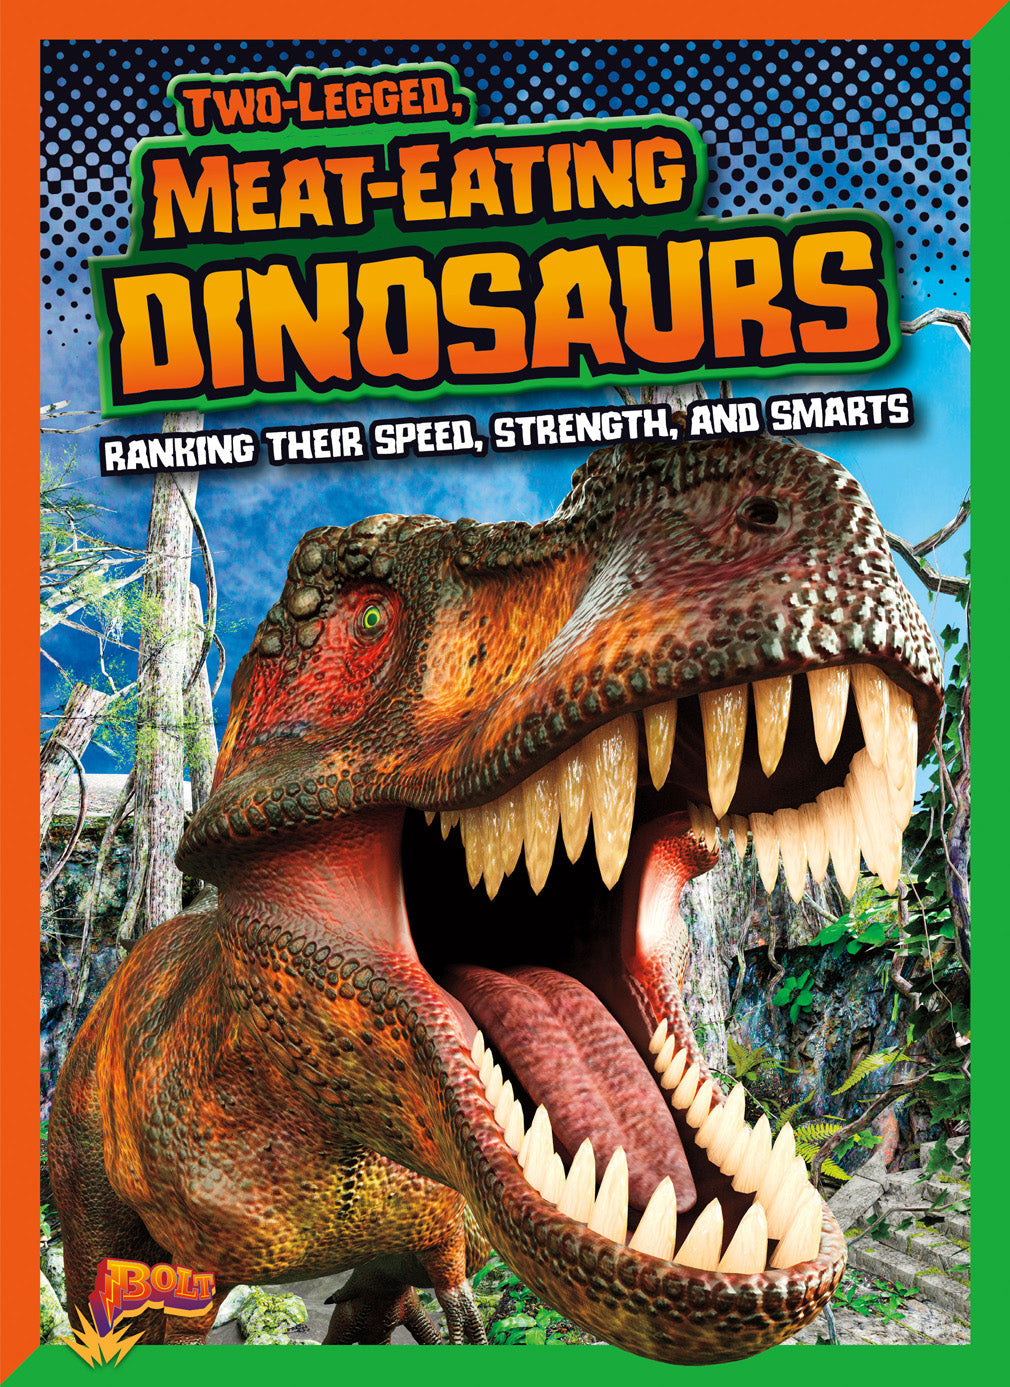 Dinosaurs by Design: Two-Legged, Meat-Eating Dinosaurs: Ranking Their Speed, Strength, and Smarts